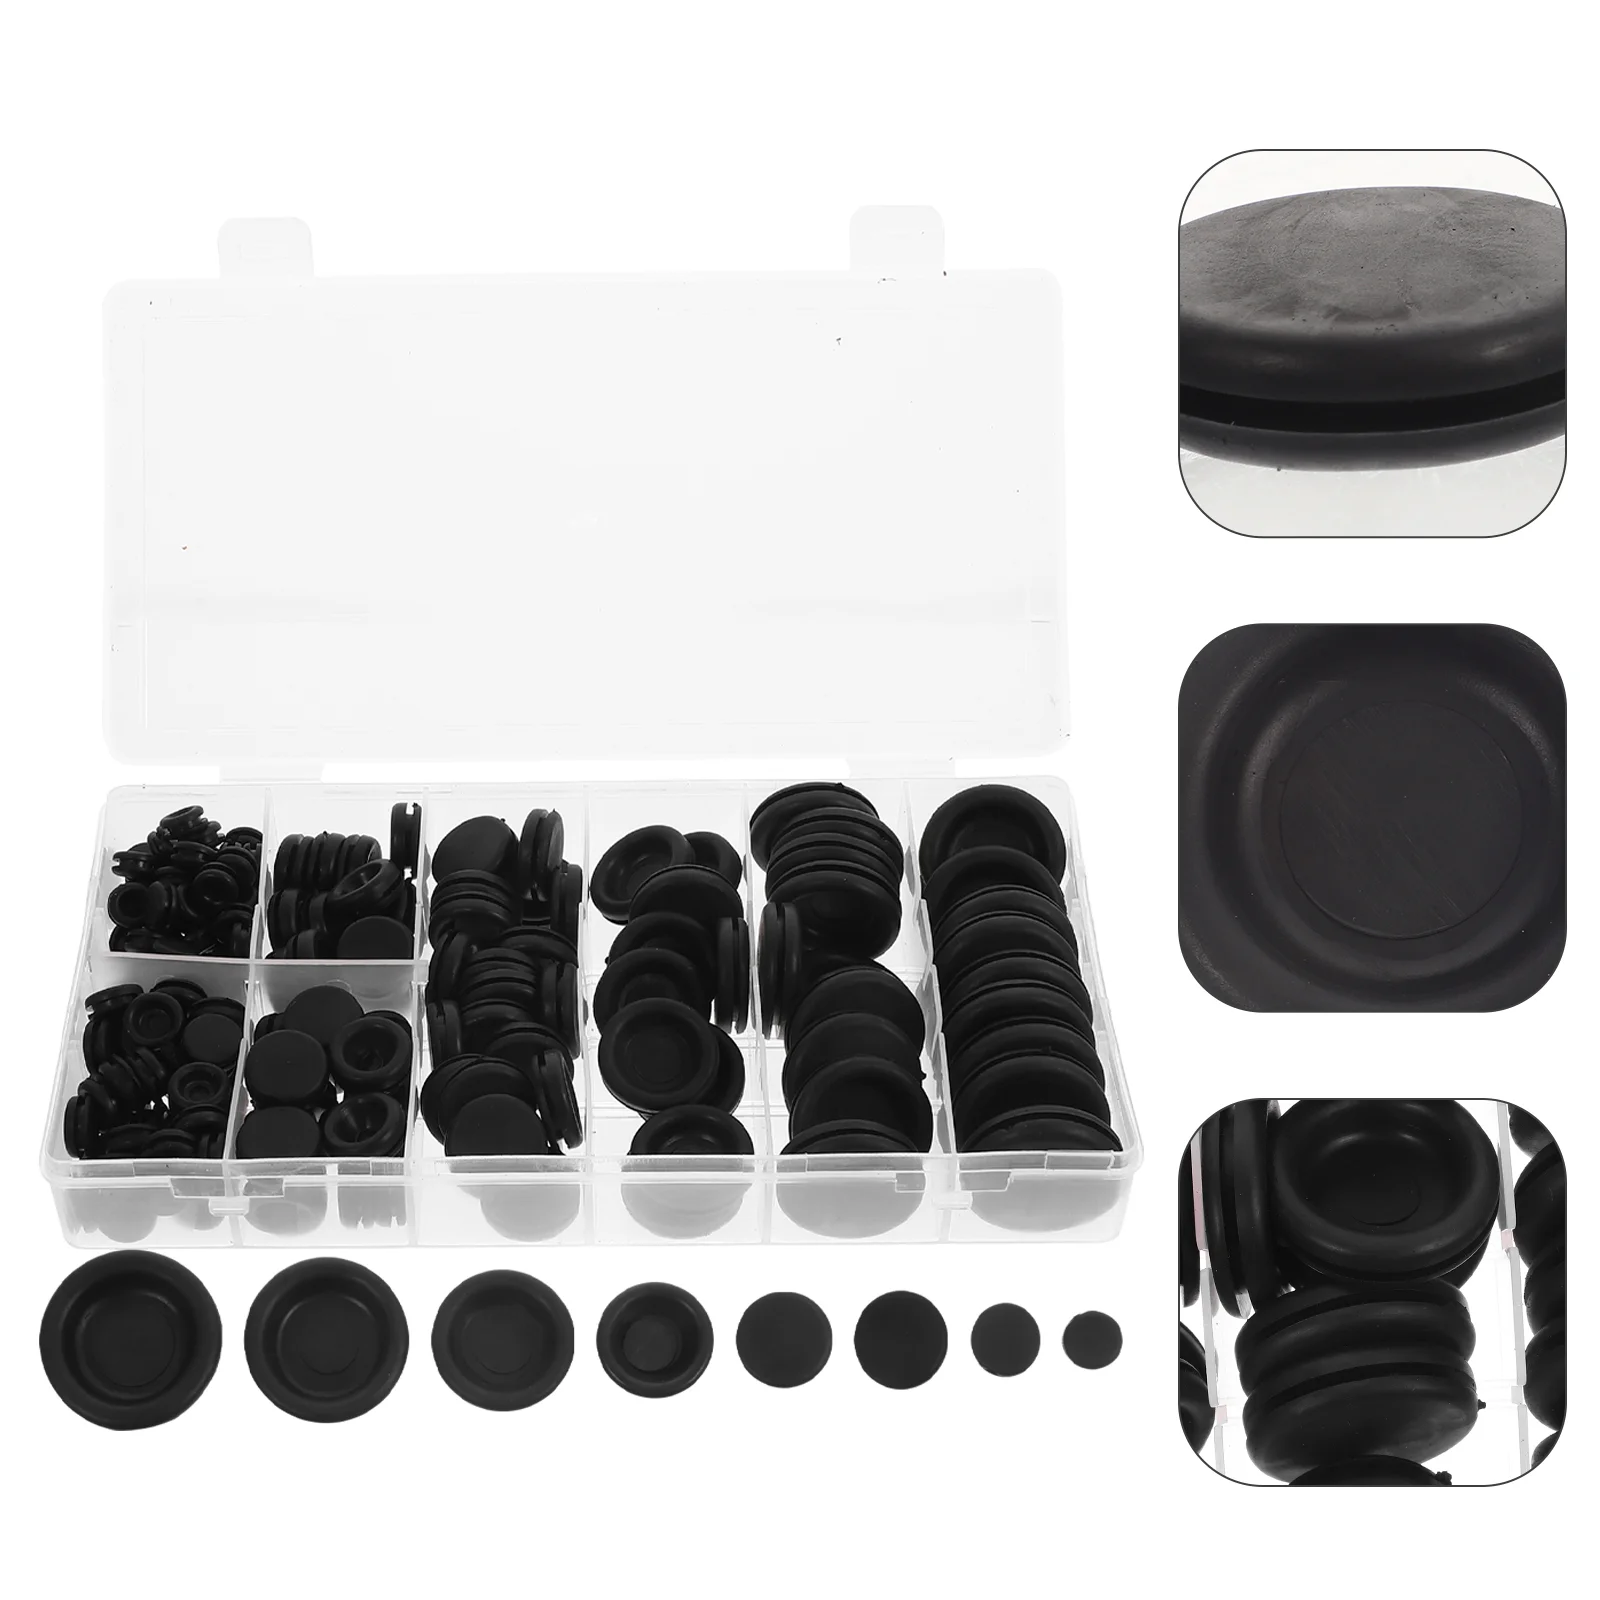 

Rubber Gasket Grommet Grommets Plugs Hole Wireautomotive Wiring Washer Ring Assortment Plug Sealing Kit Electrical Round Sided